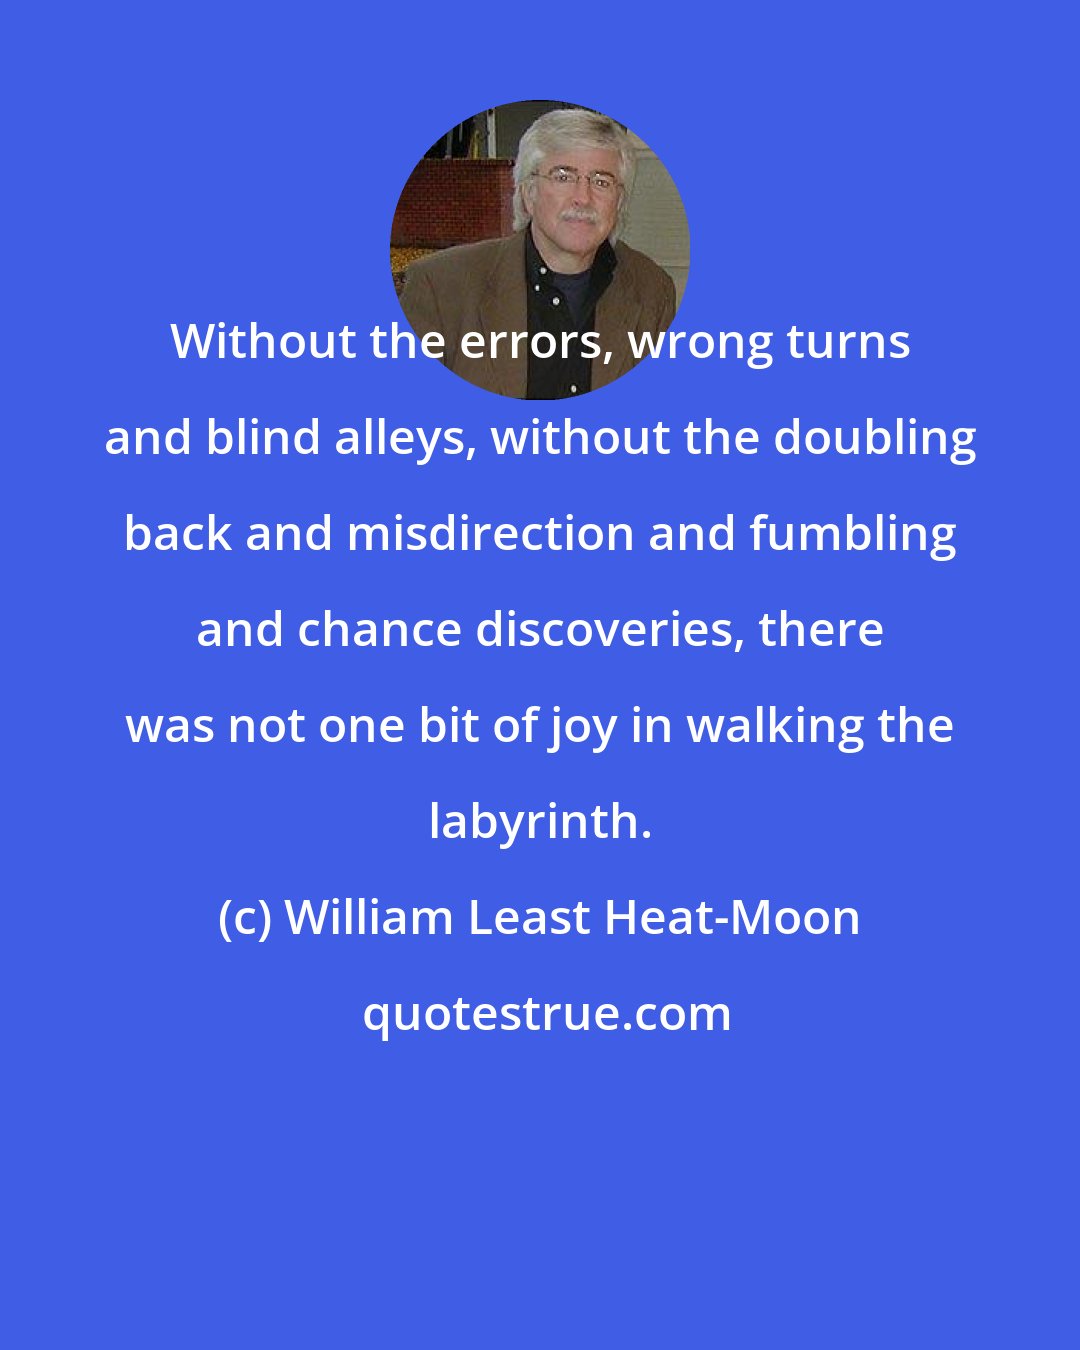 William Least Heat-Moon: Without the errors, wrong turns and blind alleys, without the doubling back and misdirection and fumbling and chance discoveries, there was not one bit of joy in walking the labyrinth.